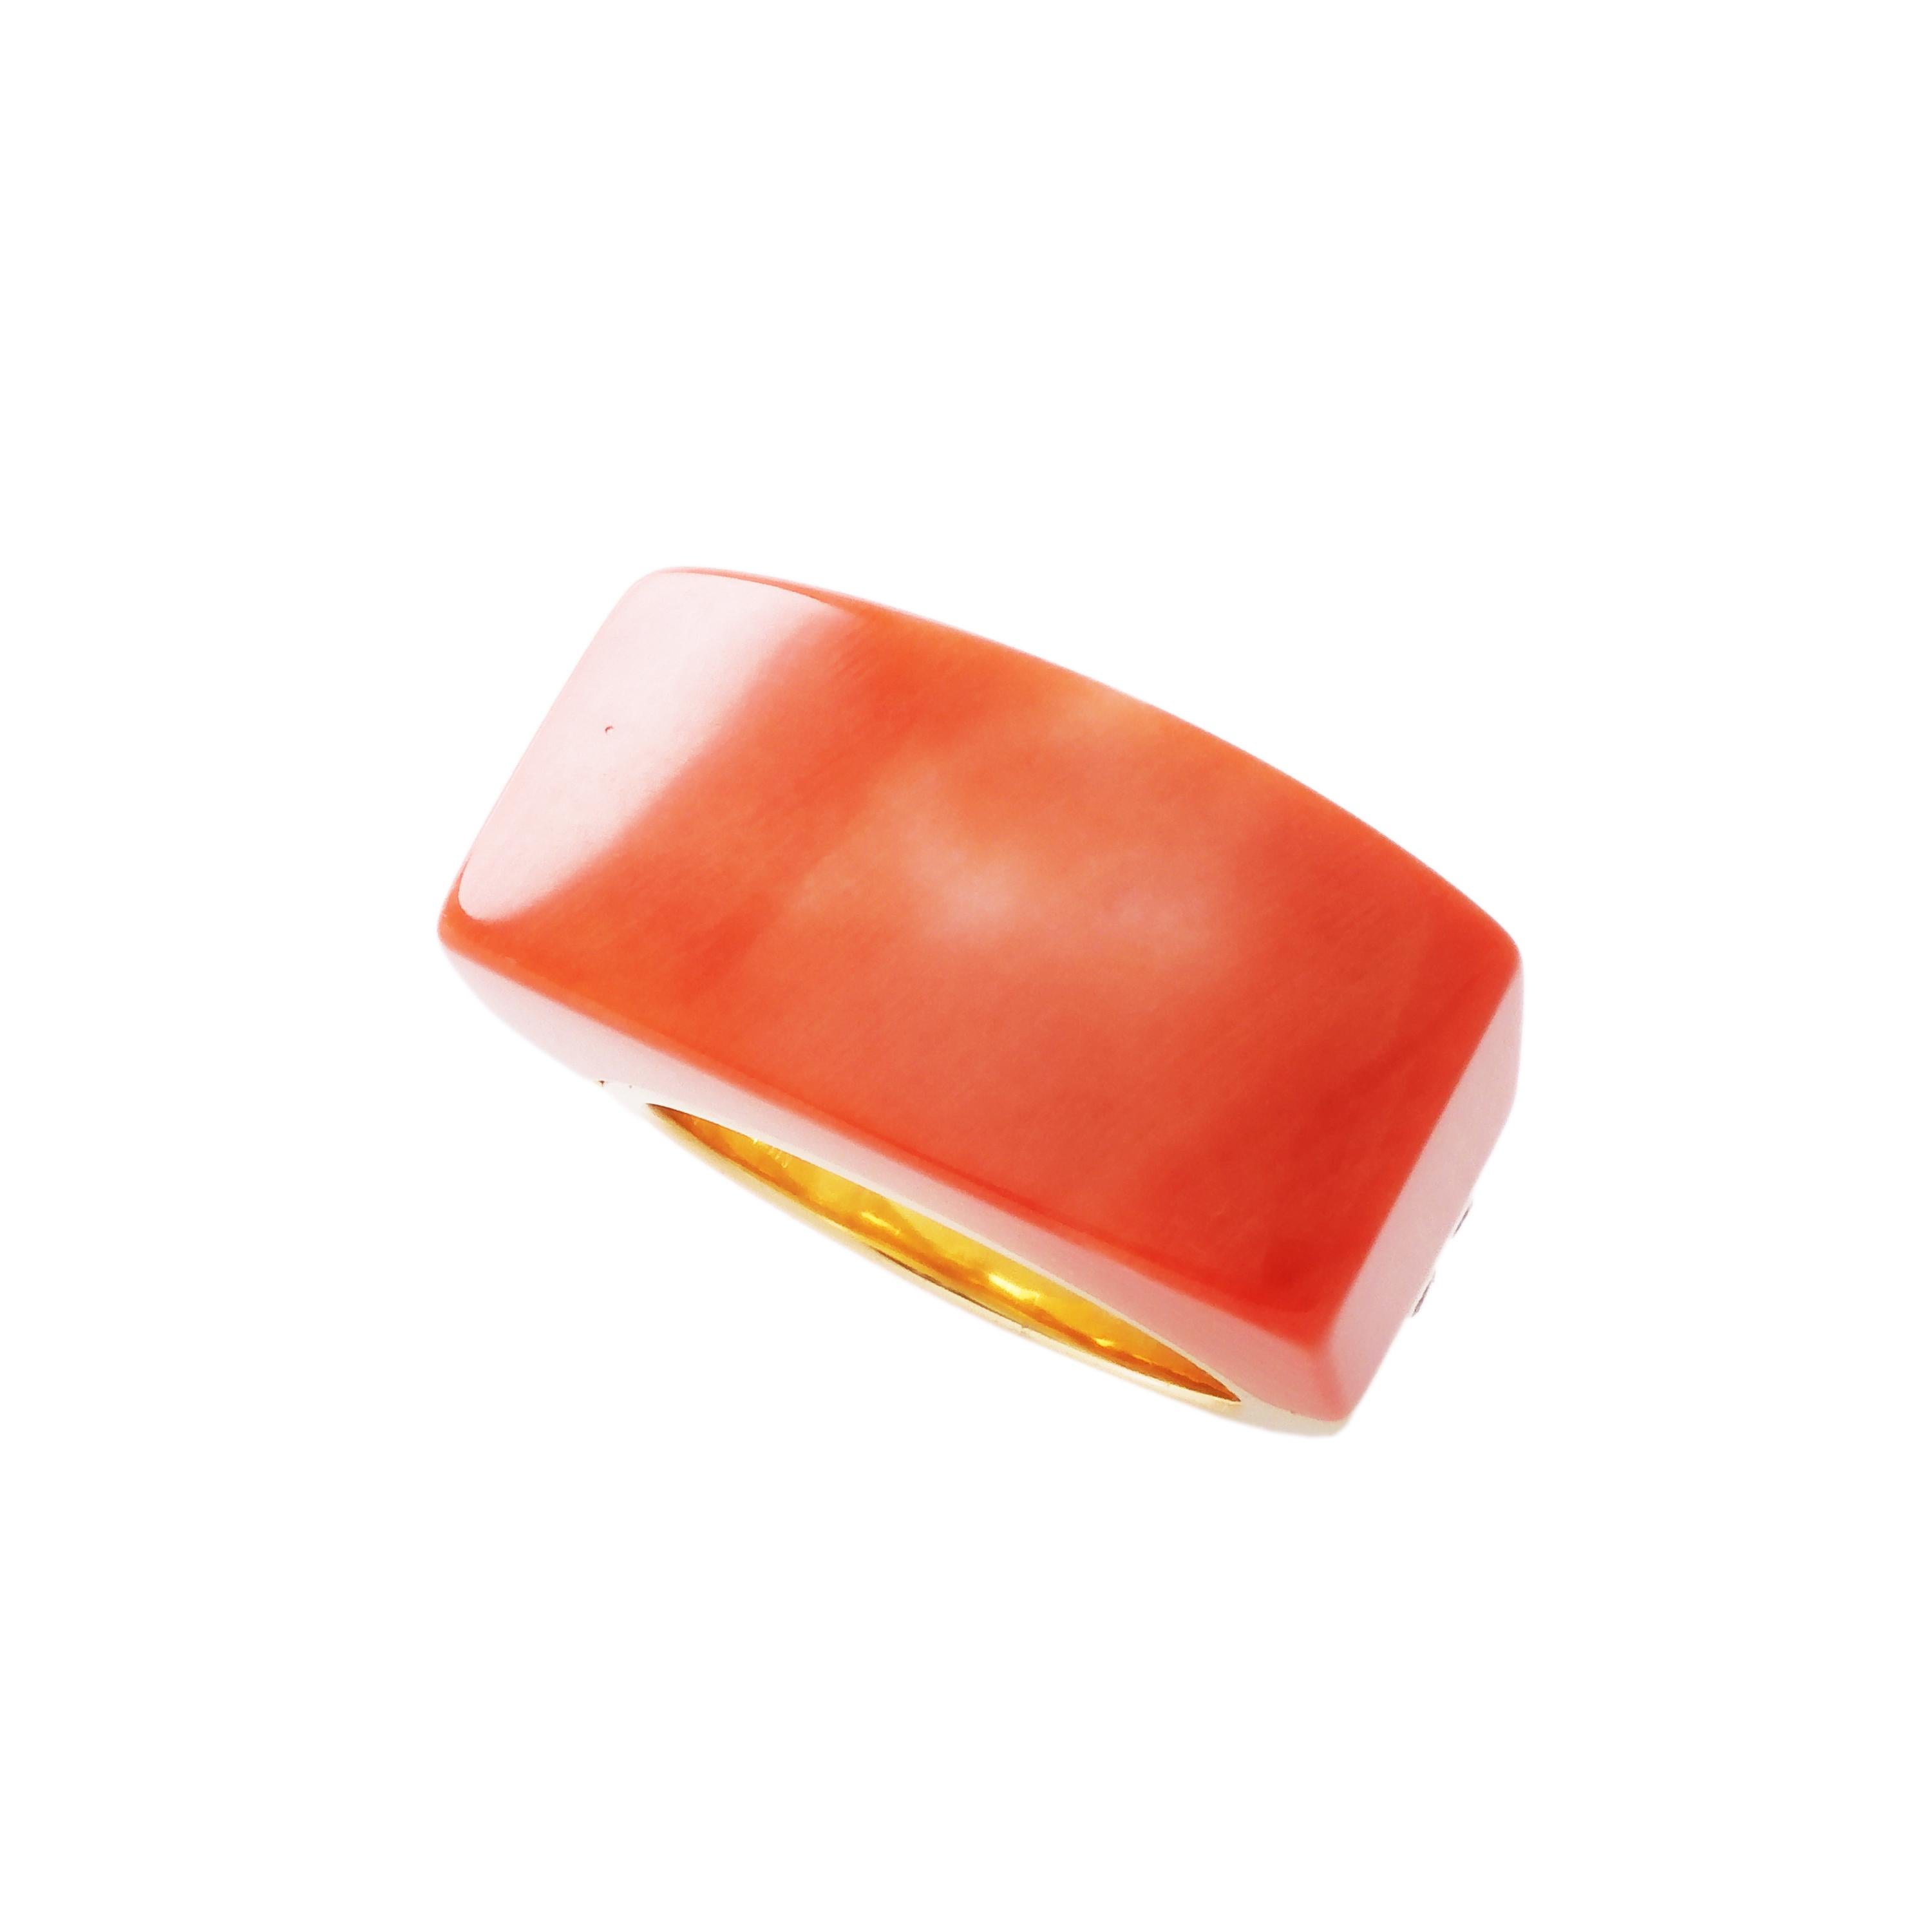 This 18 karat yellow gold ring with diamonds (approx. 0.11 carats) is set with a high quality Japanese Momoiro Sango Coral. To make this ring, one needs a large coral log (raw material) with a diameter of 30mm, but today such a large coral log